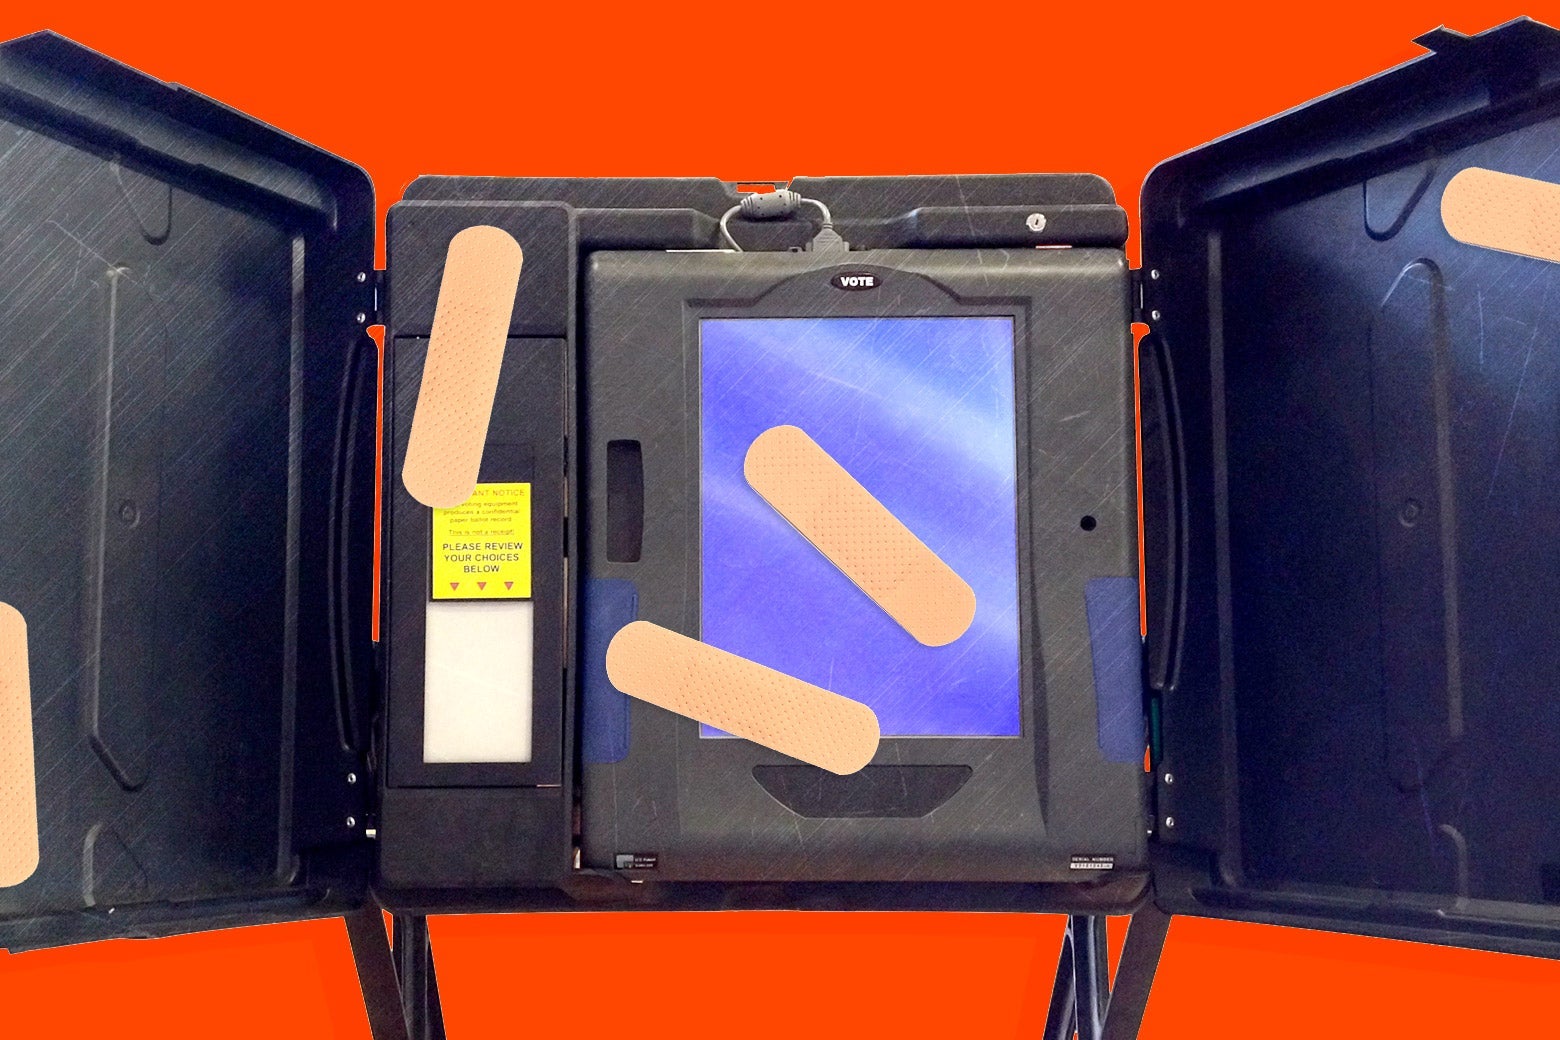 Bandages placed on a voting machine.